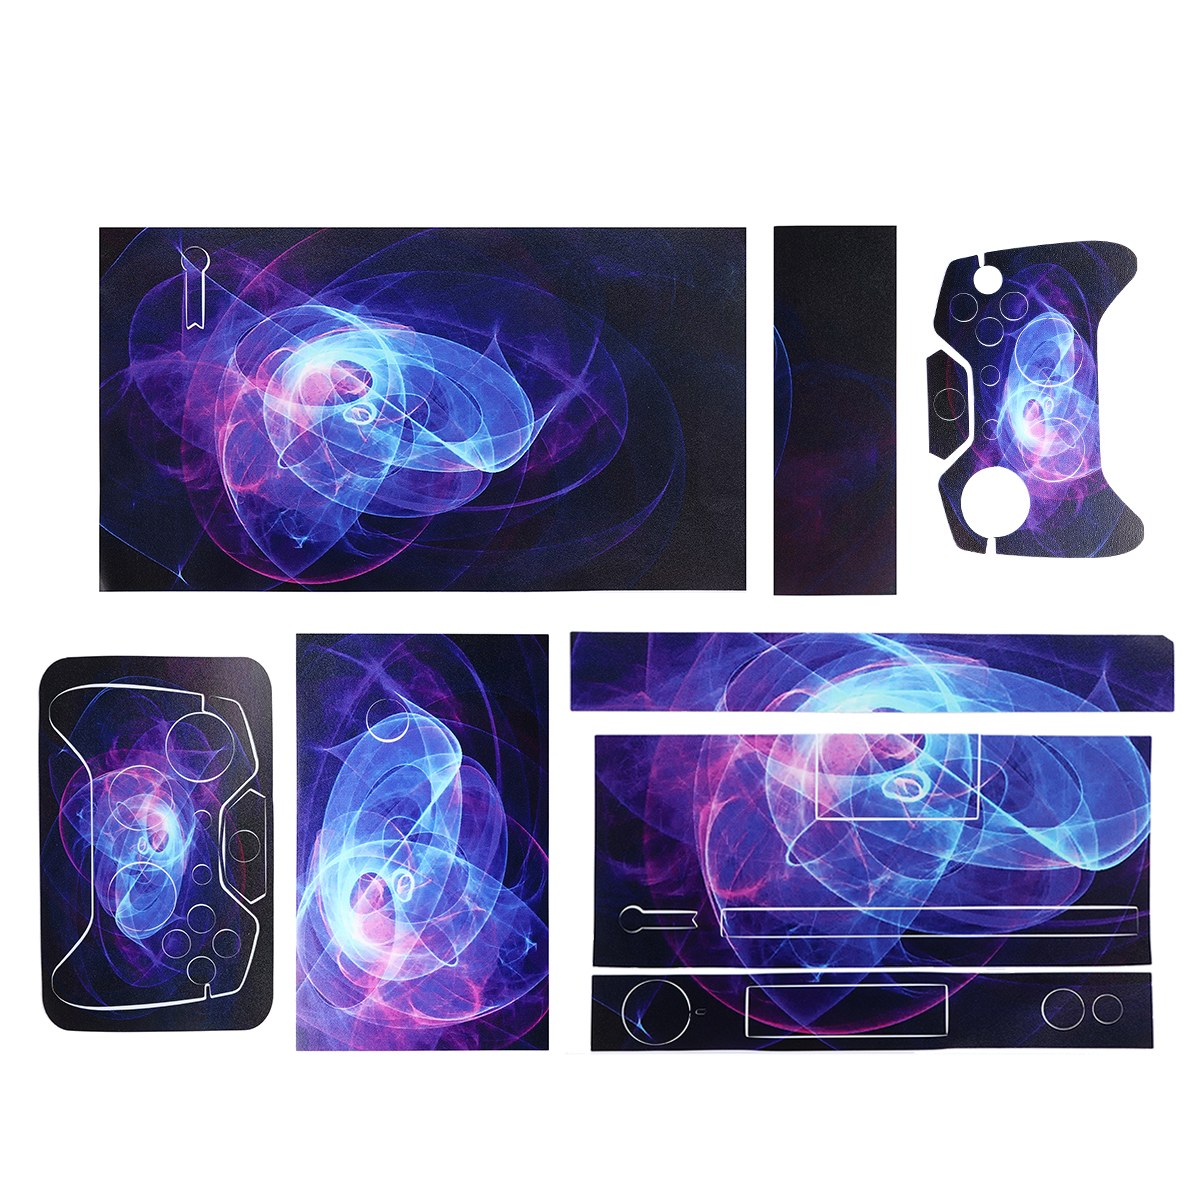 Purple Protective Vinyl Decal Skin Stickers Wrap Cover For Xbox One Game Console Game Controller Kinect 29